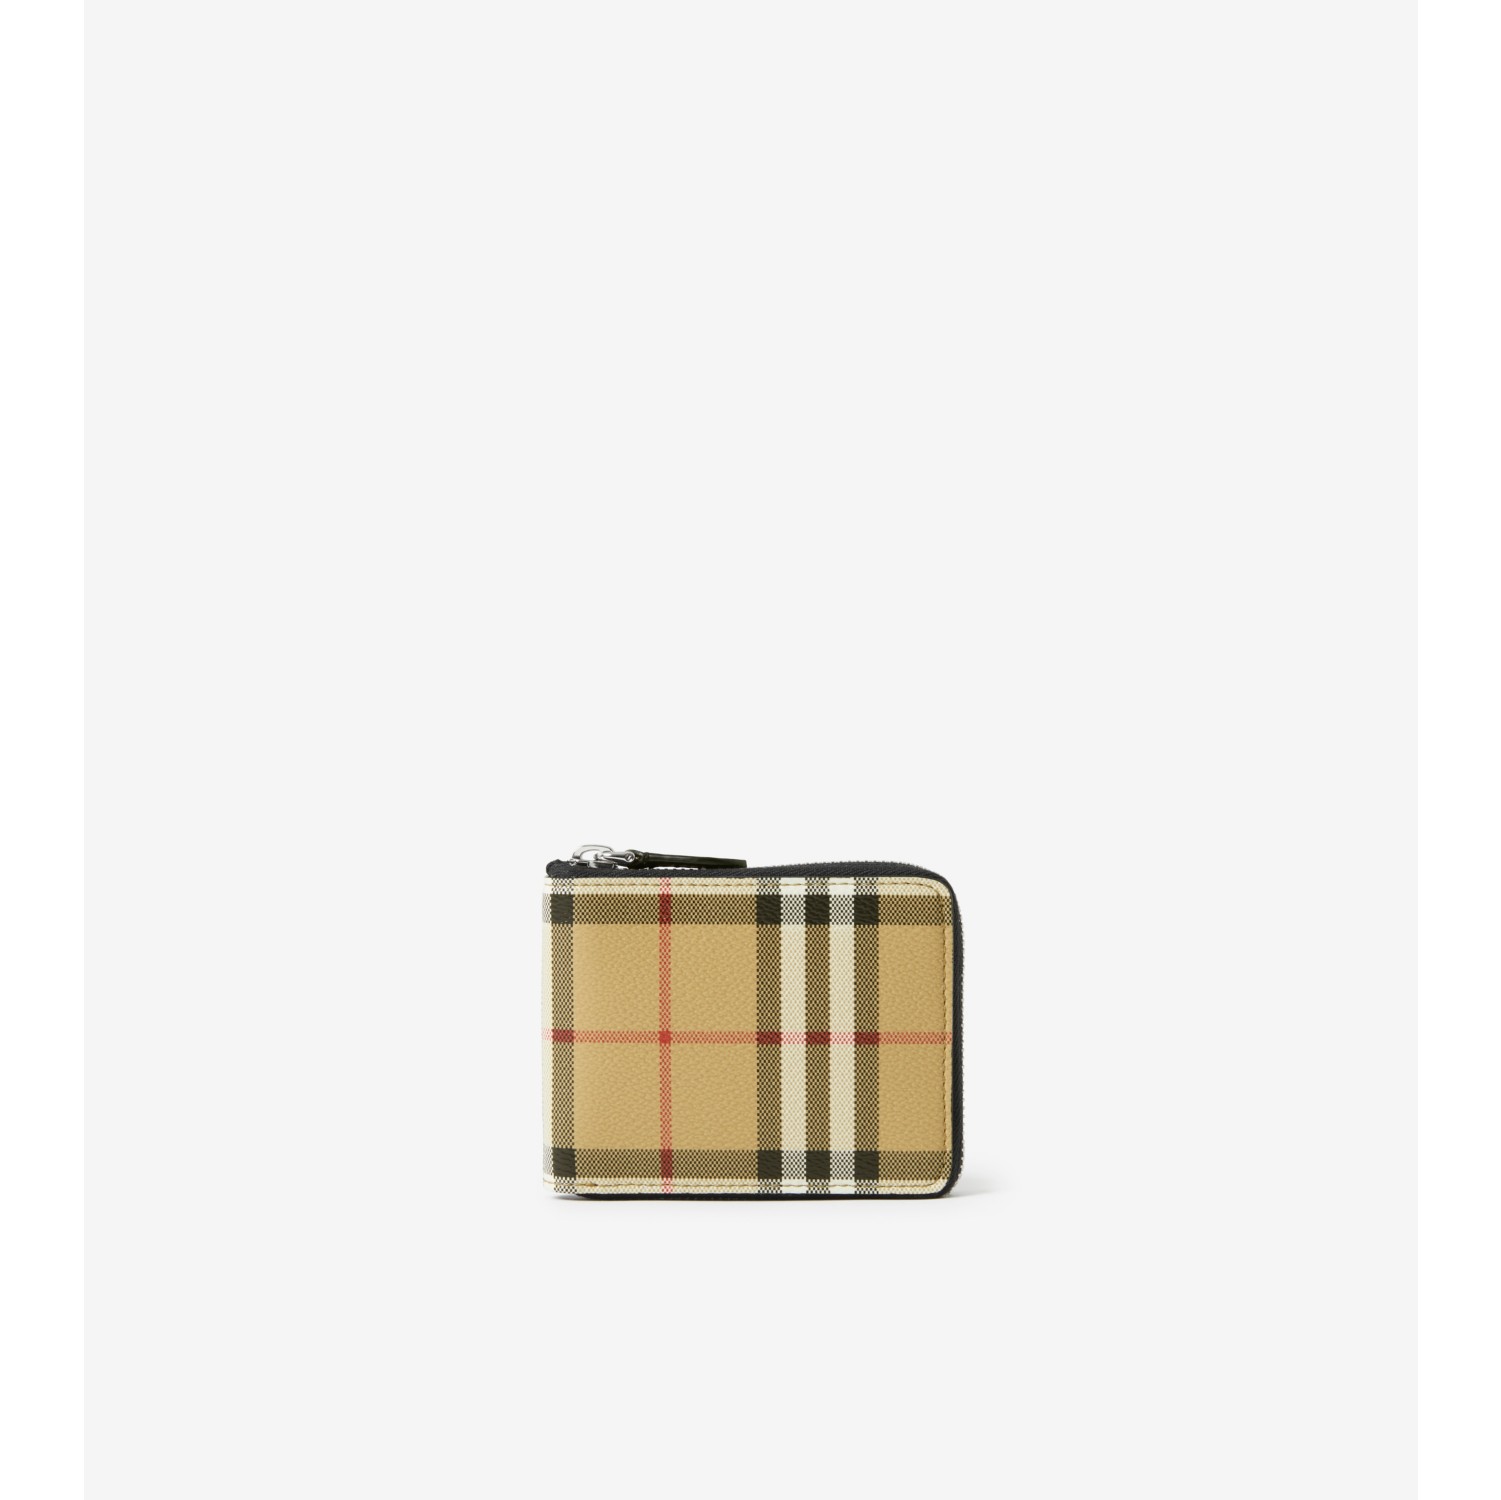 Burberry Vintage Check and Leather Zip Card Case Black / Beige